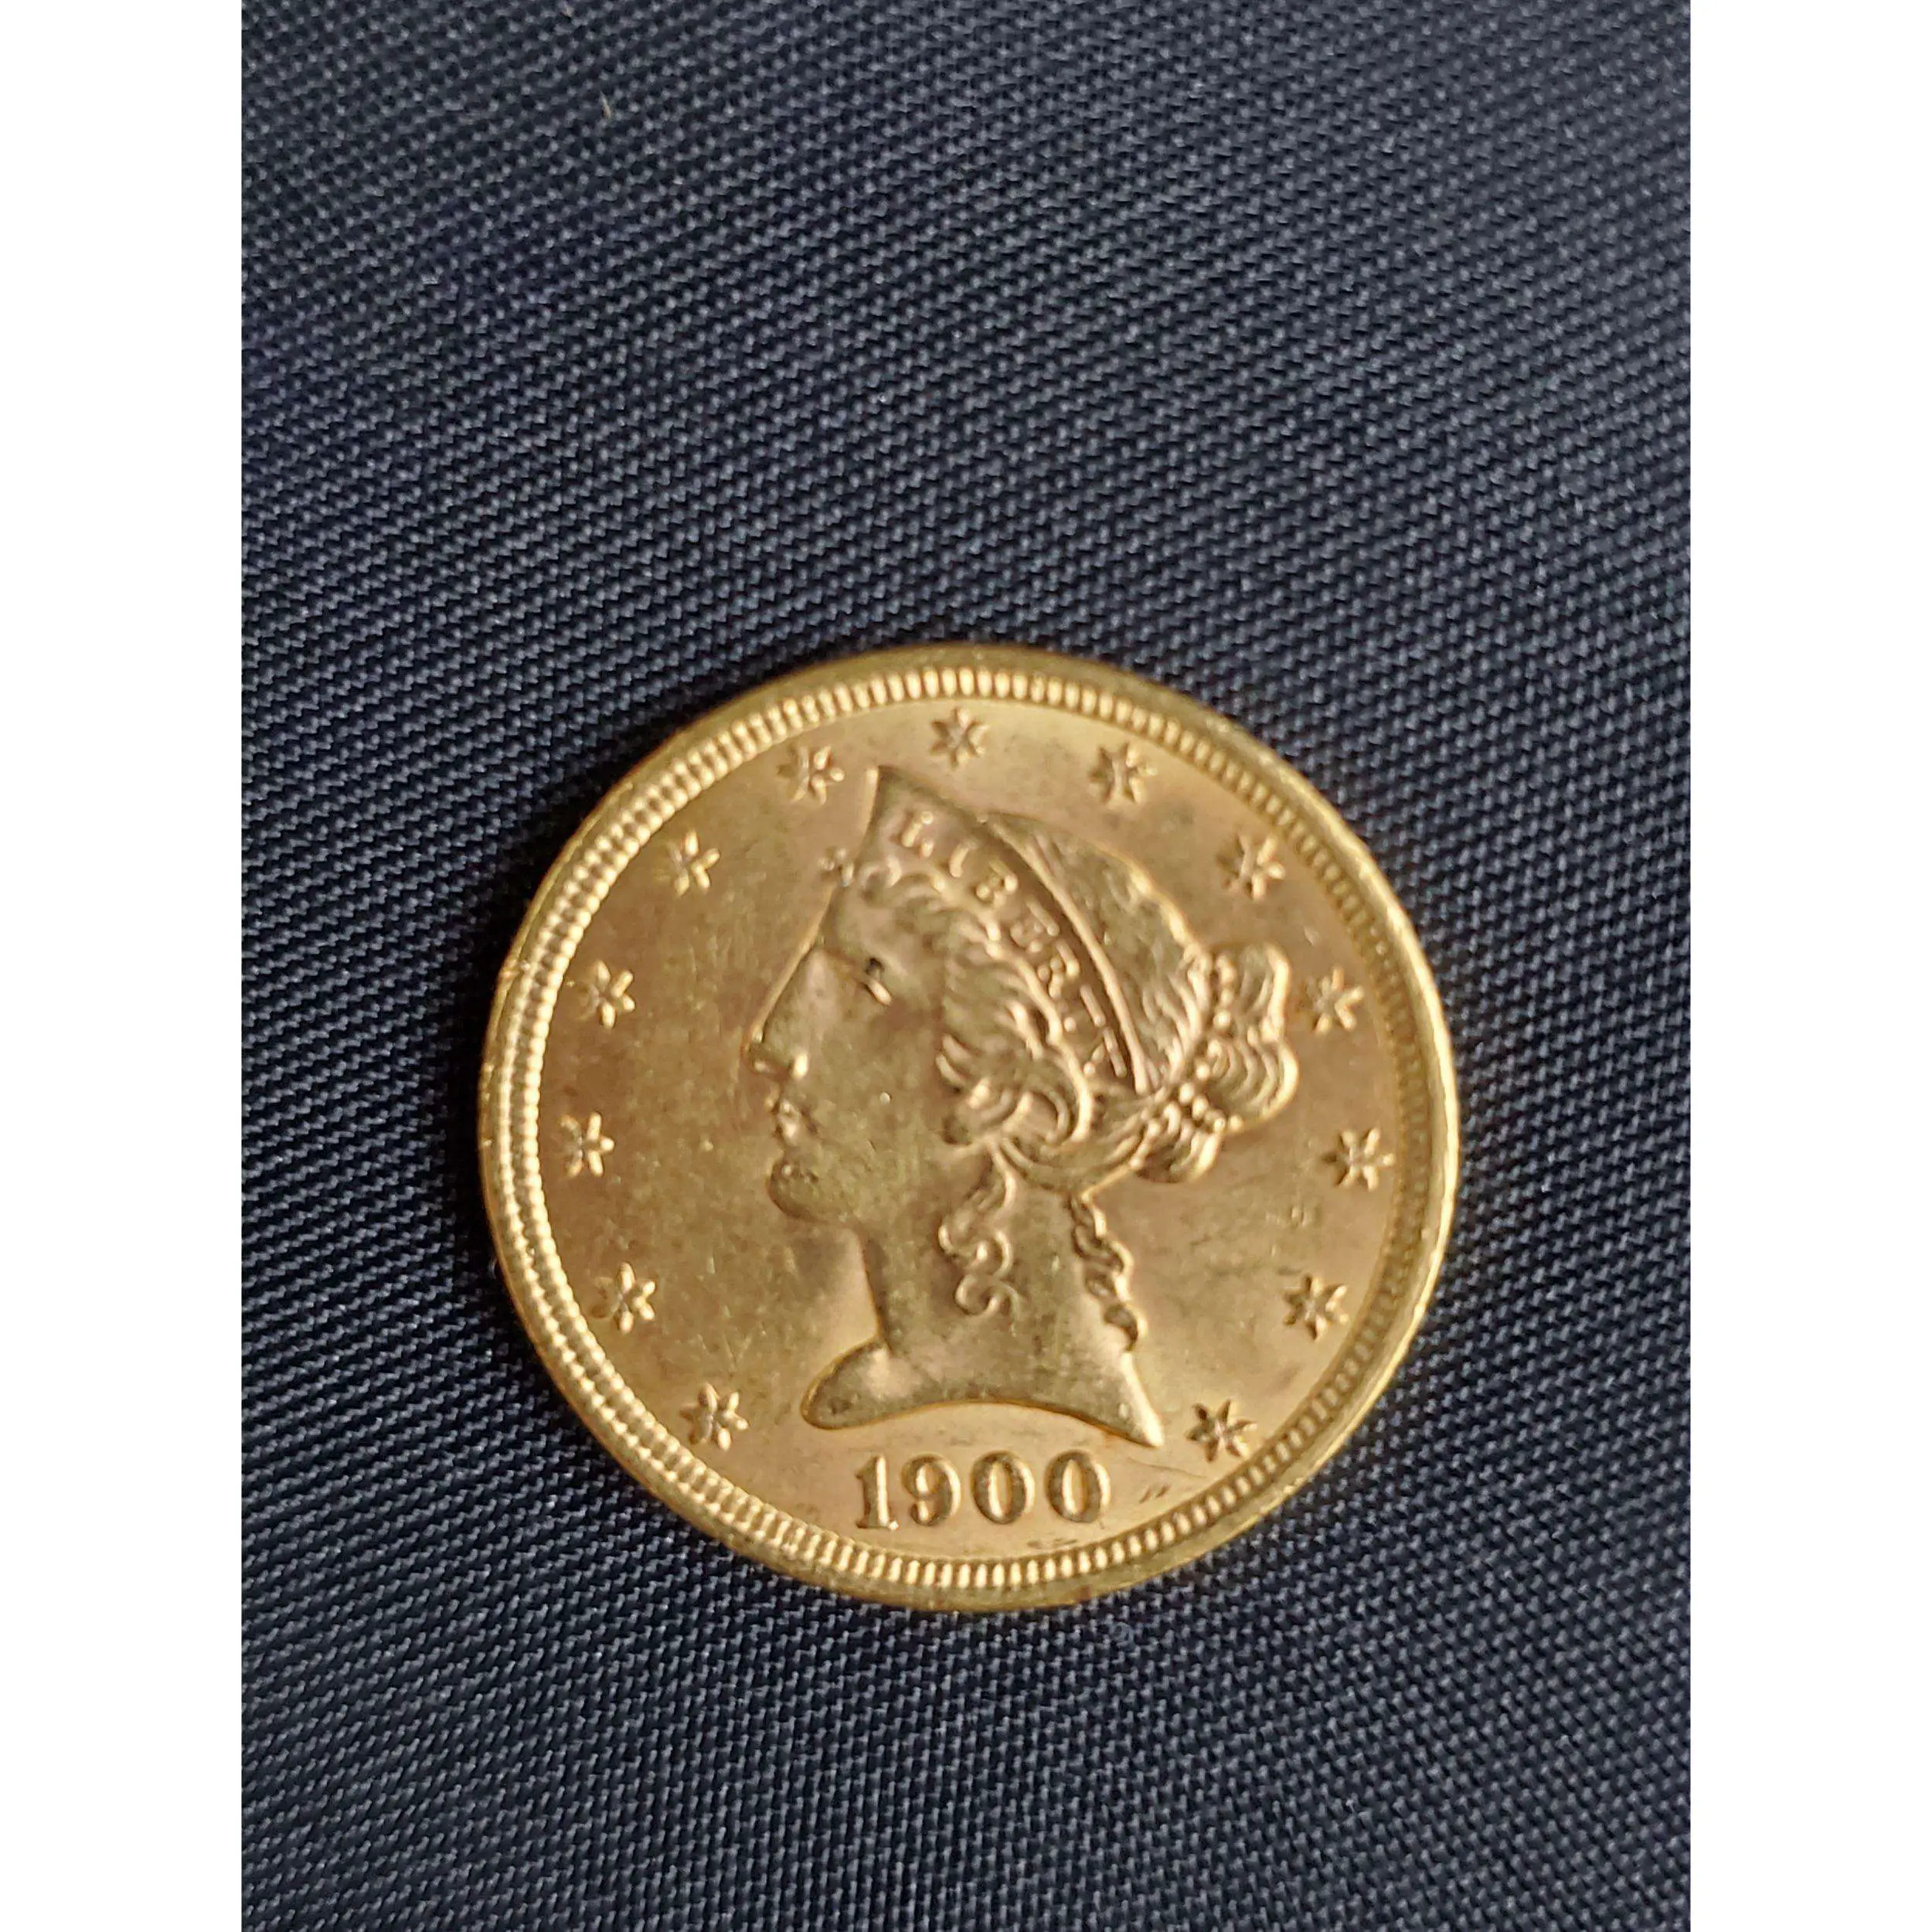 Sold Price: 5 Dollar Liberty Gold Coin dated 1900 8 Grams.